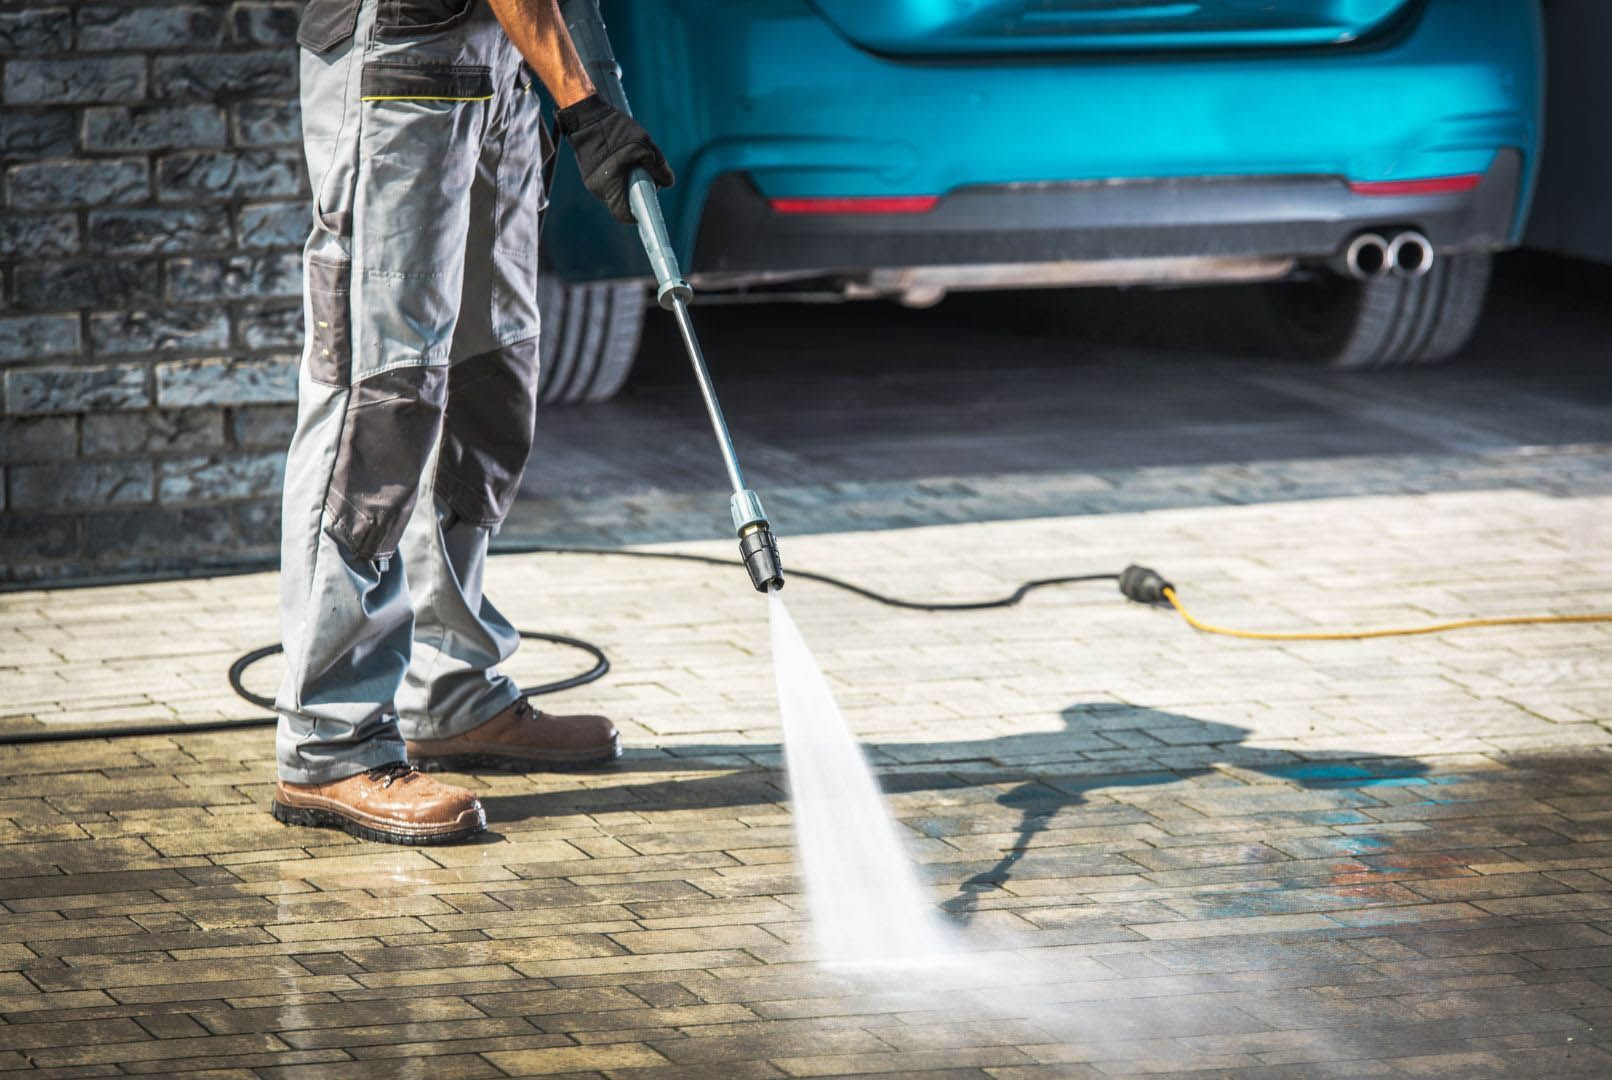 A man is using a high pressure washer to clean a driveway.